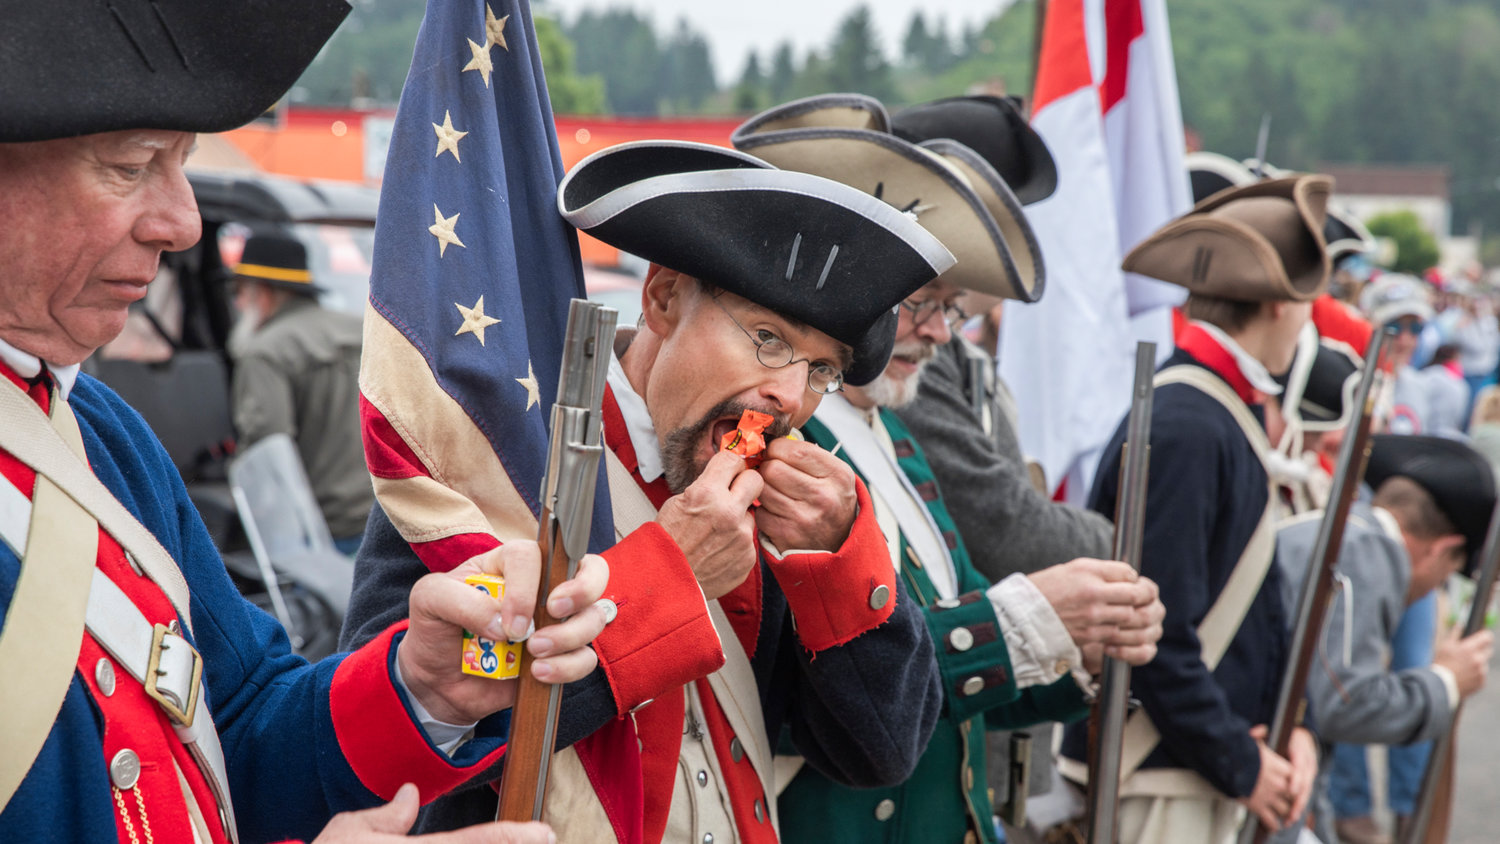 Attendees dressed in Revolutionary War garb unwrap candy during the Mossyrock Freedom Festival parade Saturday.